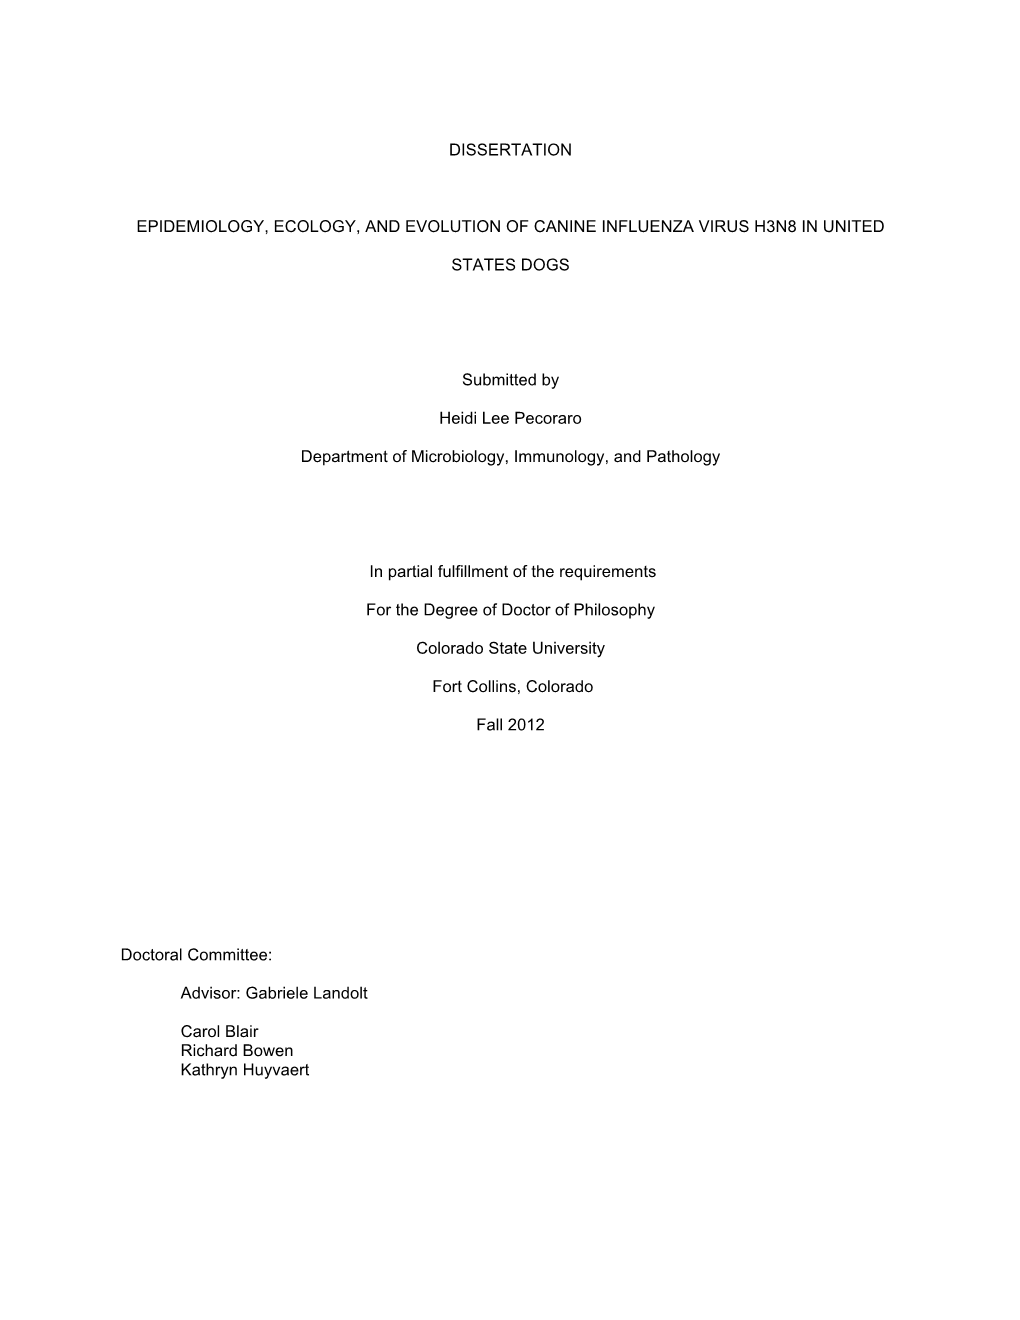 Dissertation Epidemiology, Ecology, and Evolution Of